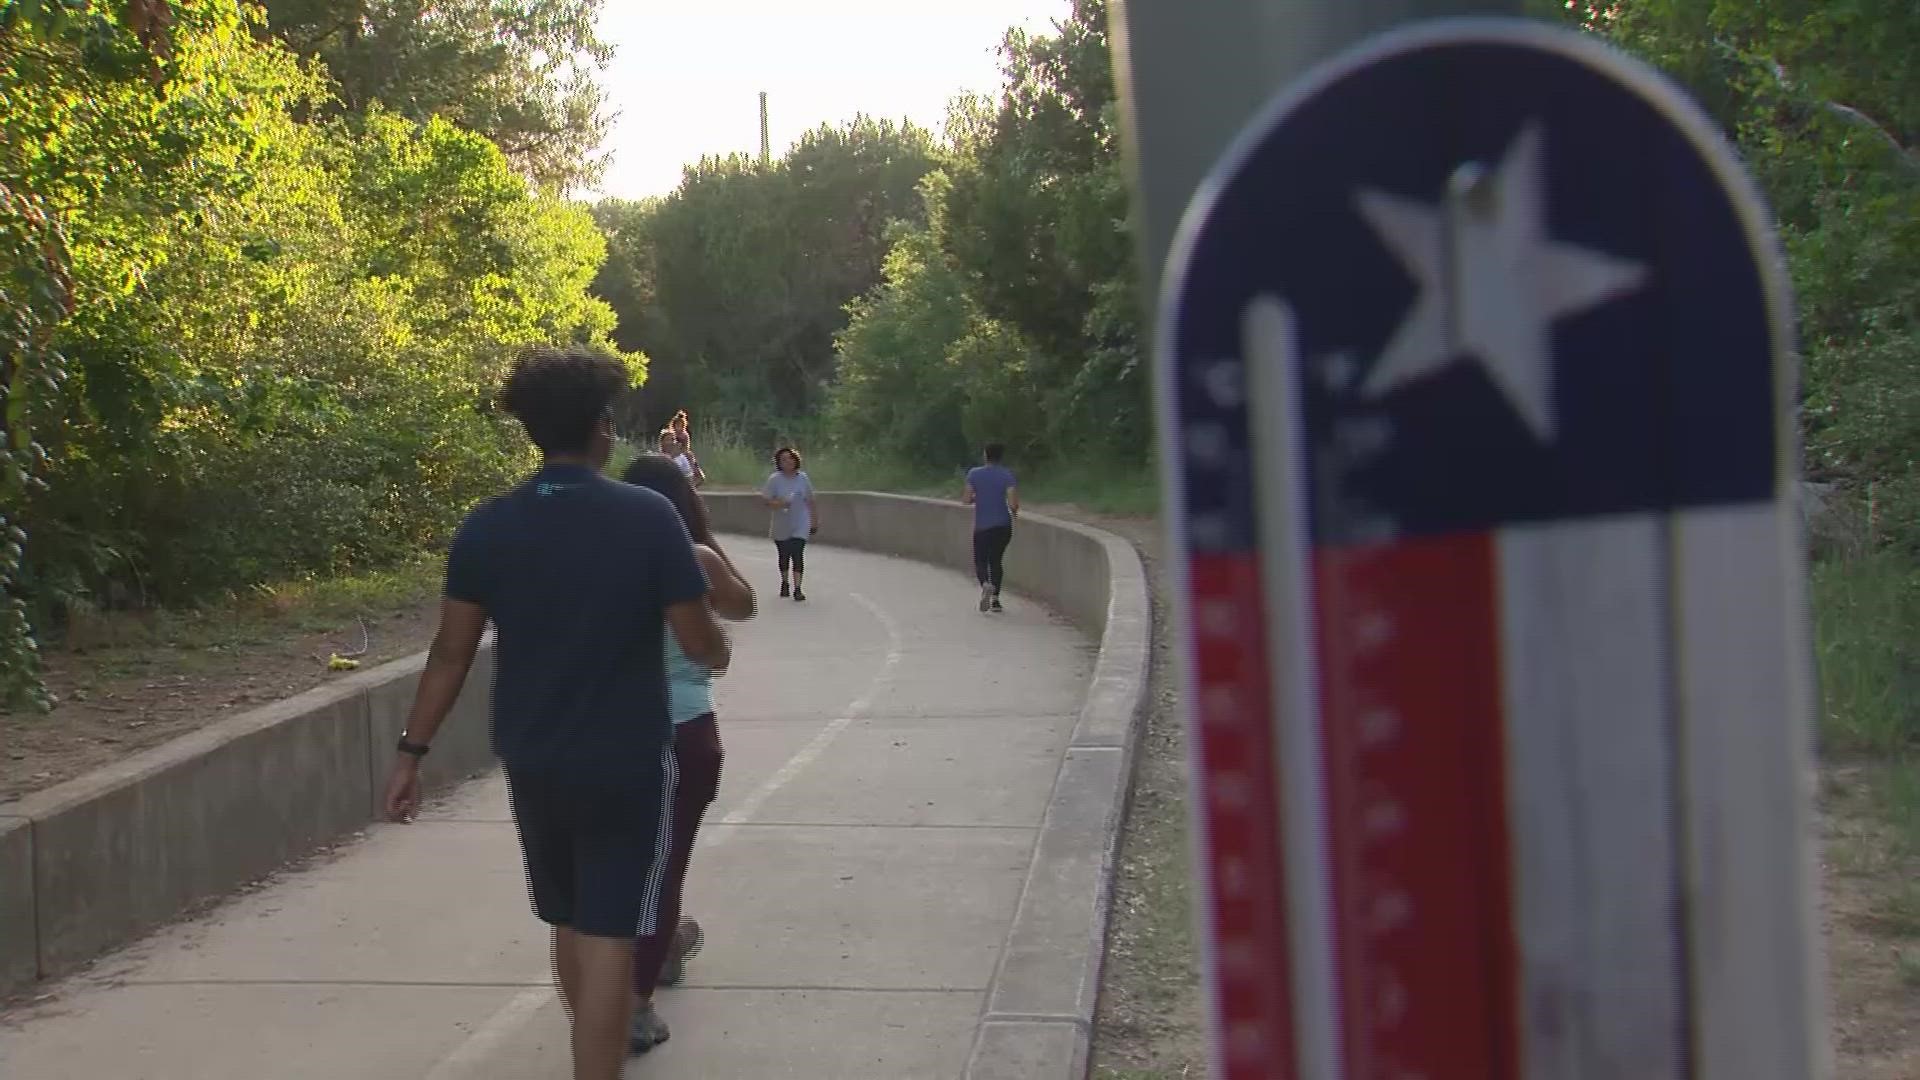 The Austin area is currently in the middle of a pretty intense heat wave. We went out to Walnut Creek Metropolitan Park to find out how locals are beating the heat.